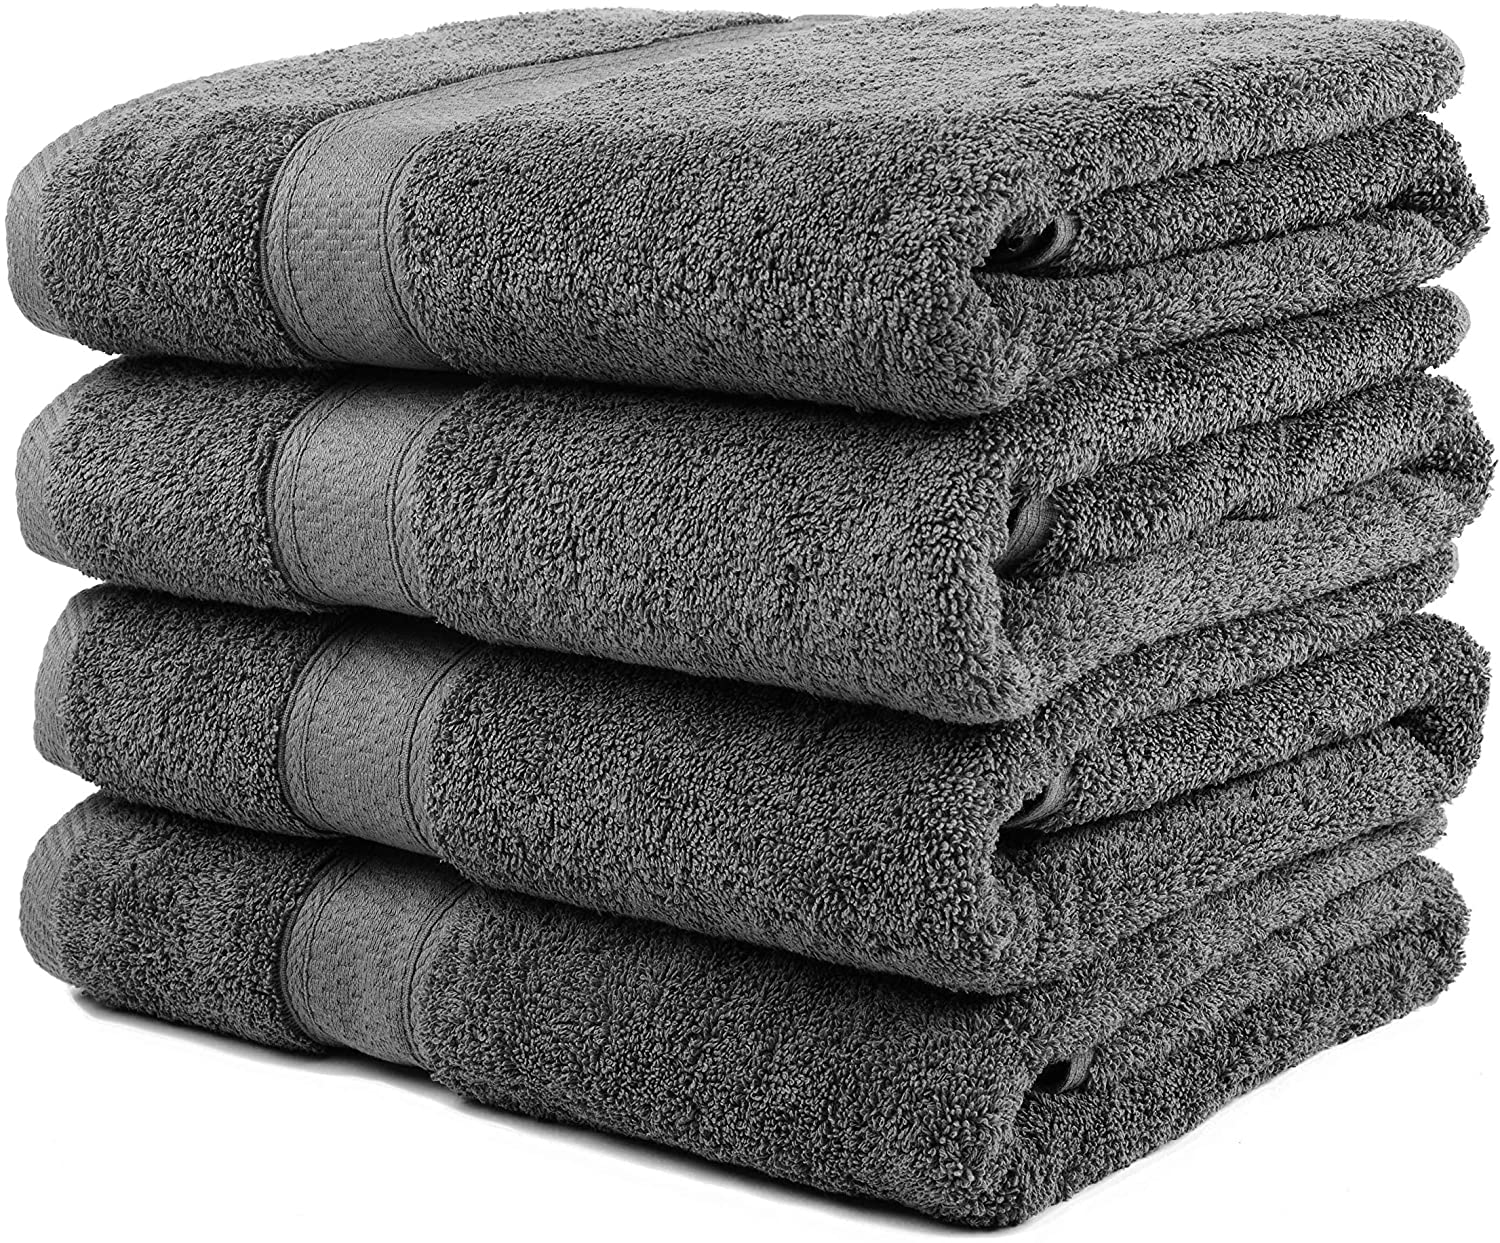 Ariv Towels 4-Piece Large Premium Cotton Bamboo Bath Towels Set for  Sensitive Skin & Daily Use-Soft, Quick Drying & Highly Absorbent for  Bathroom